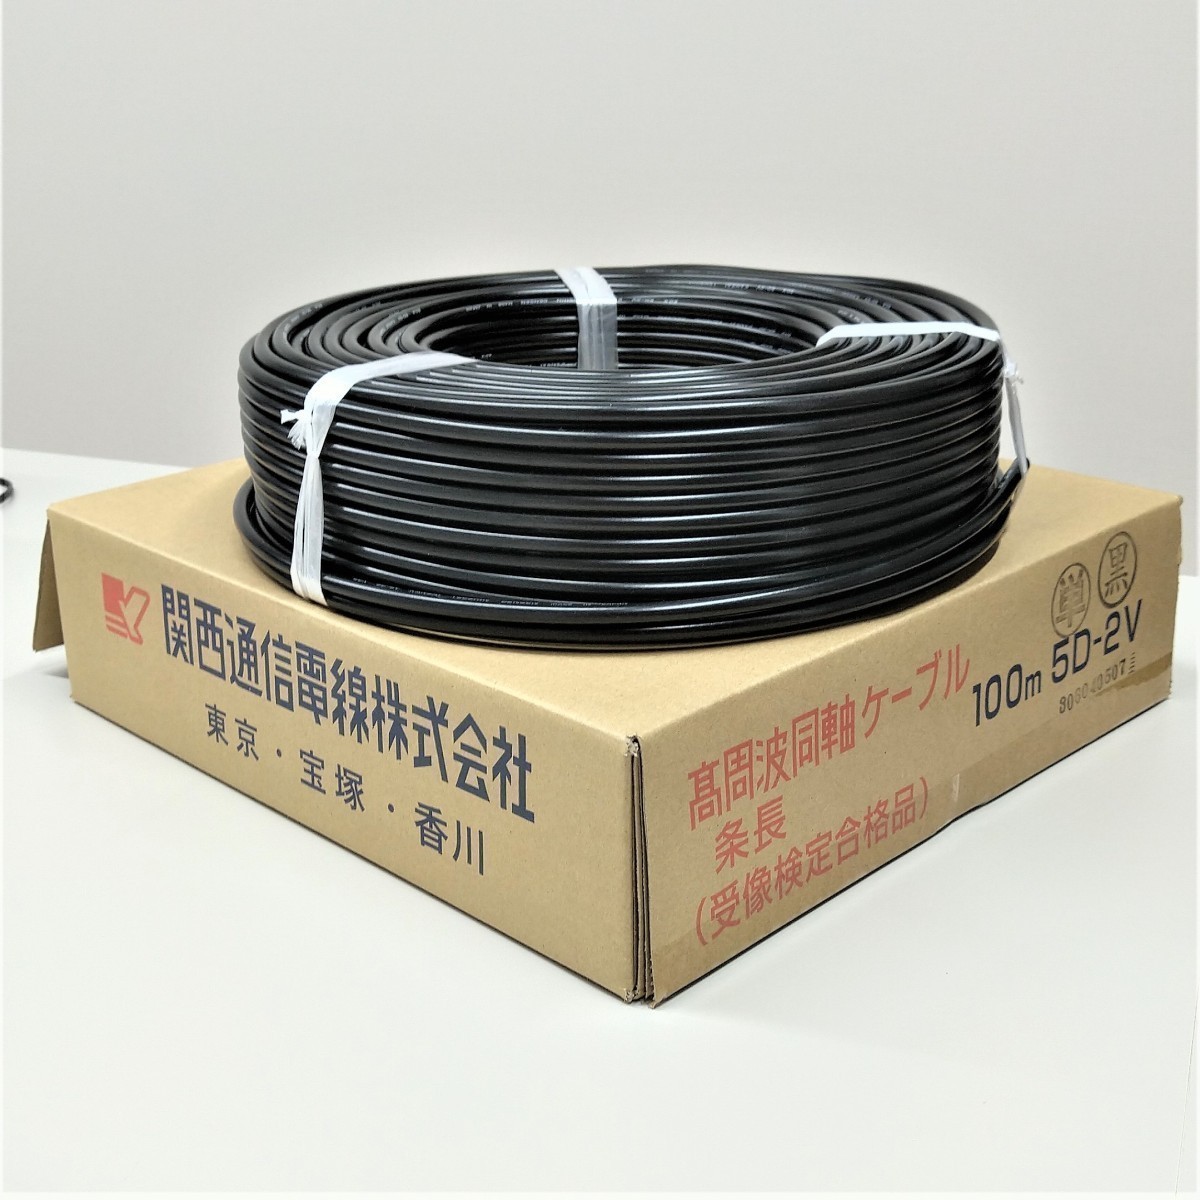 5D2V(5D-2V) 10m black color postage 499 jpy ( tax included )! Kansai communication electric wire 50Ω wireless for coaxial cable mail service use . Japan all country anywhere!1 volume 5d-2v 5d2v K52B-10